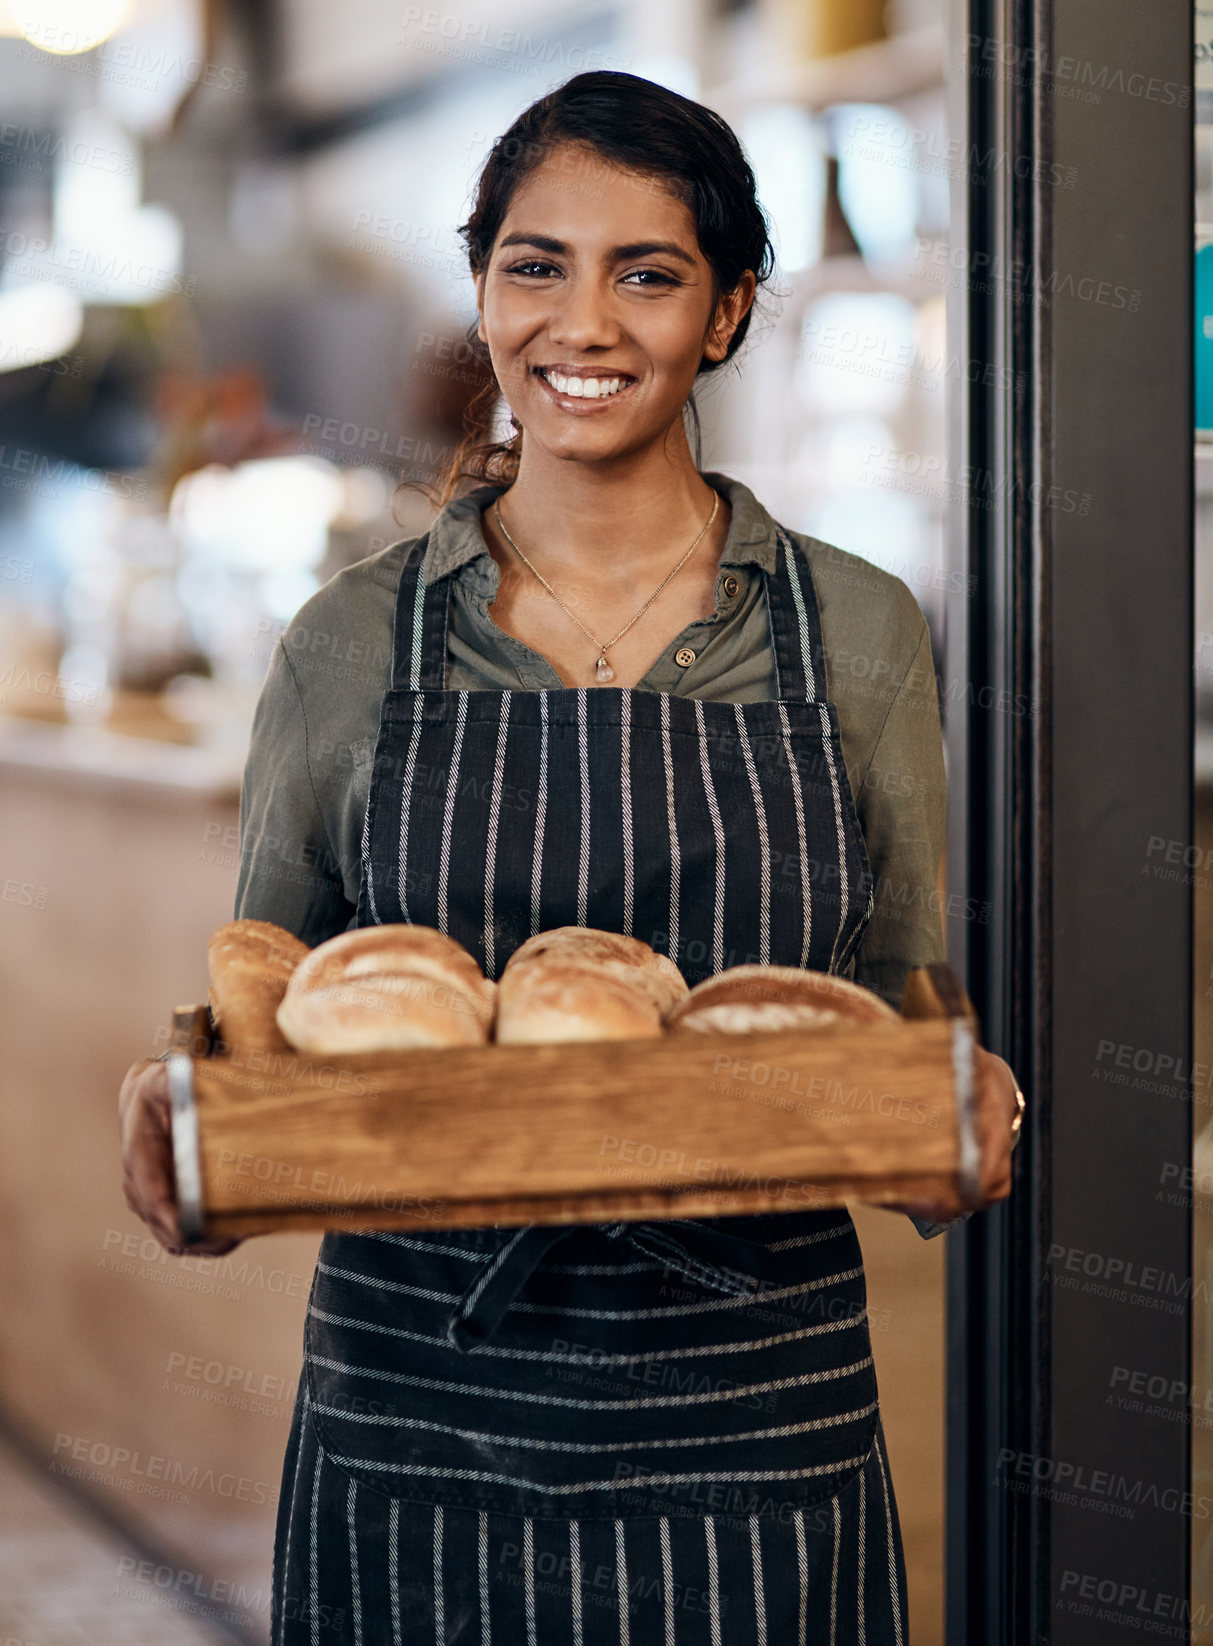 Buy stock photo Shot of a young woman holding a selection of freshly baked breads in her bakery